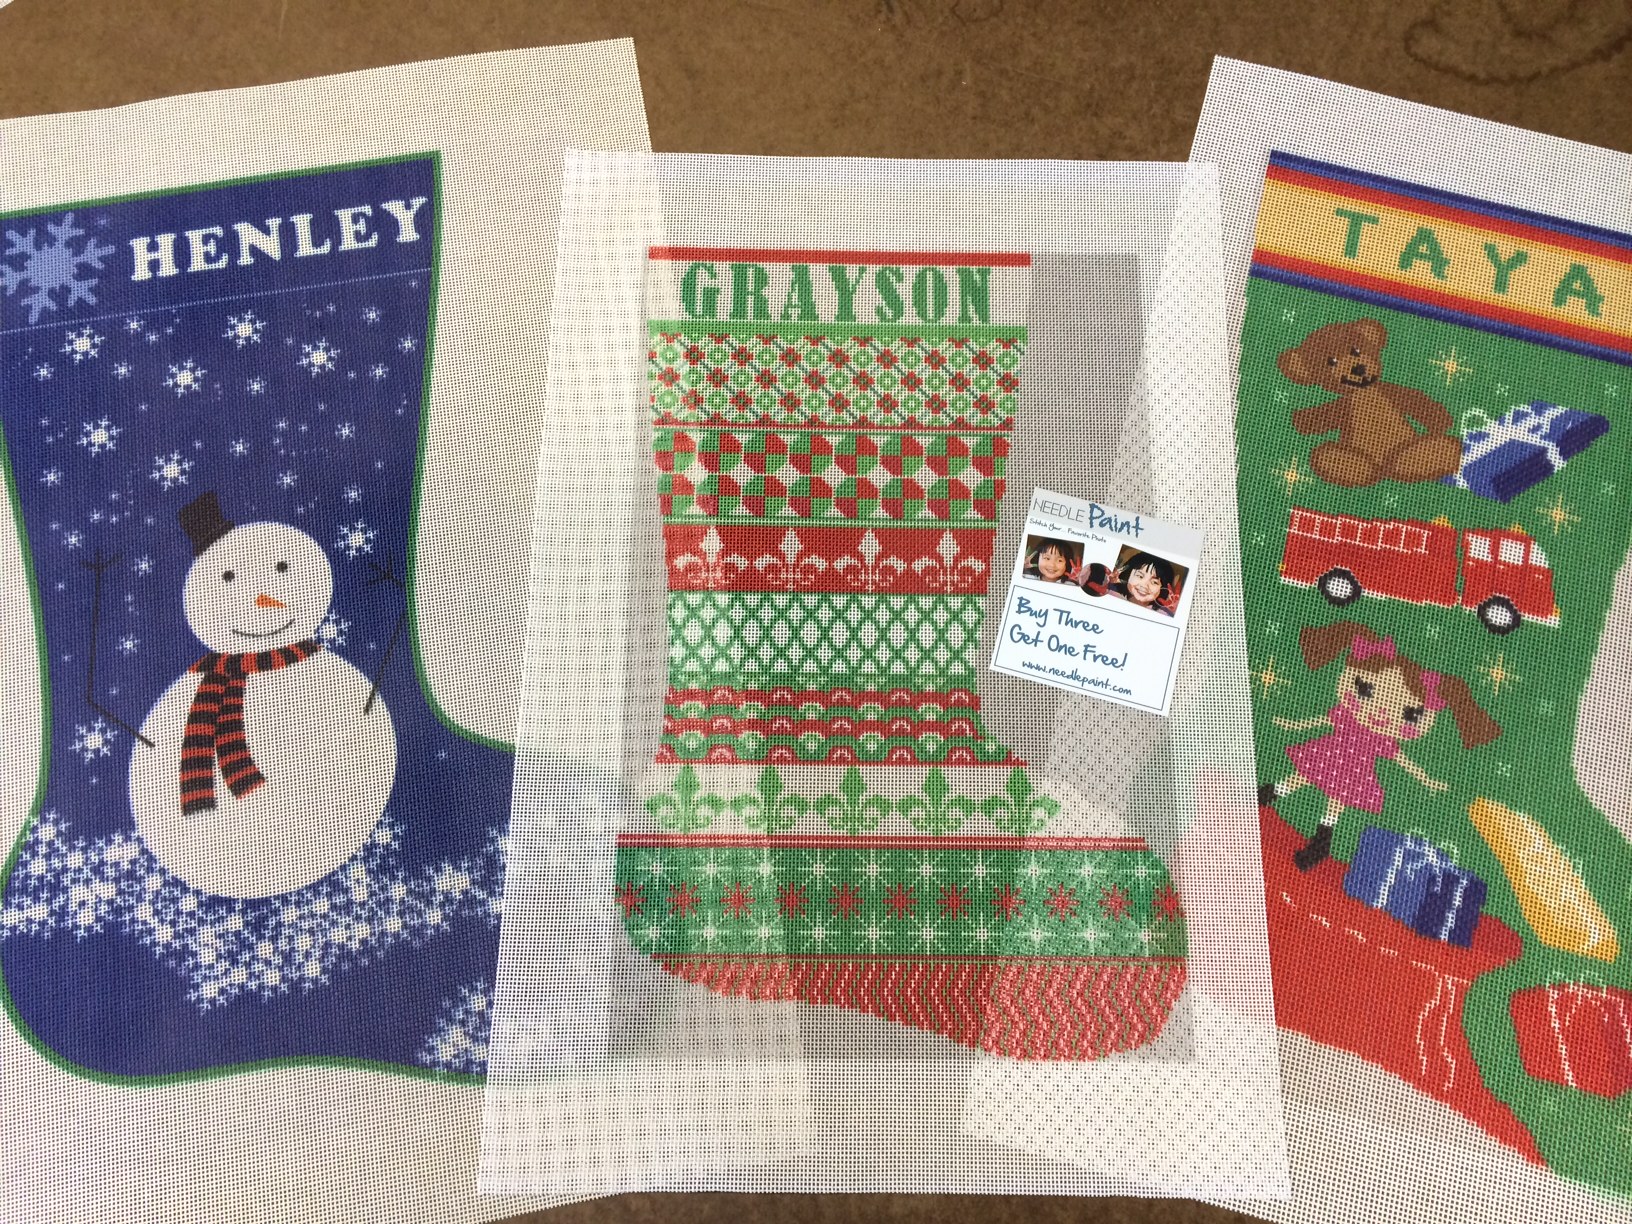 personalized needlepoint christmas stockings Archives